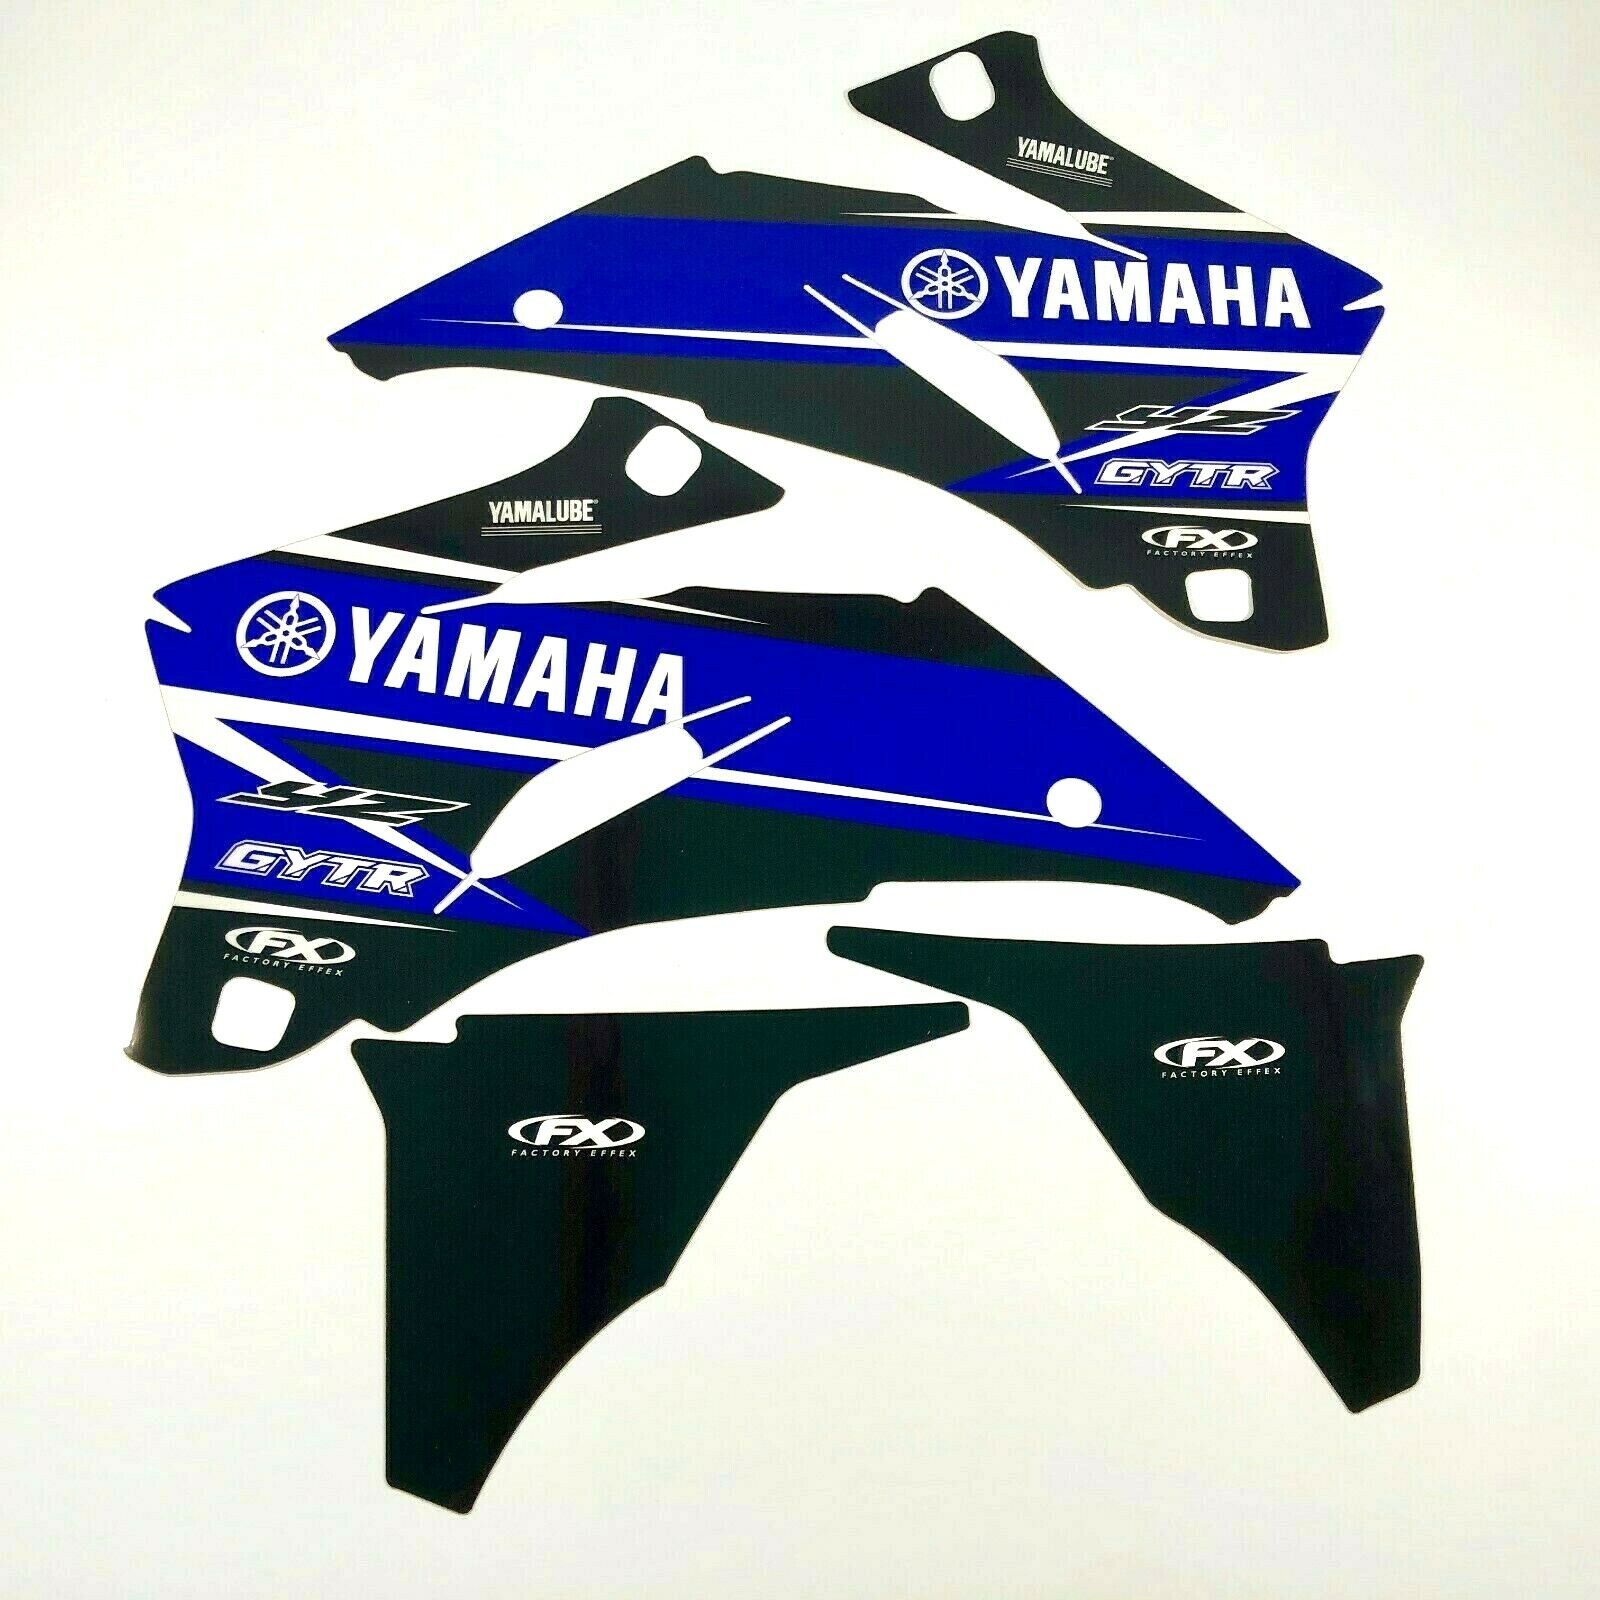 Factory Effex EVO 18 Graphics Yamaha 【ギフト】 YZF 250 最大90％オフ 450 09 08 07 06 YZ250F NEW YZ450F